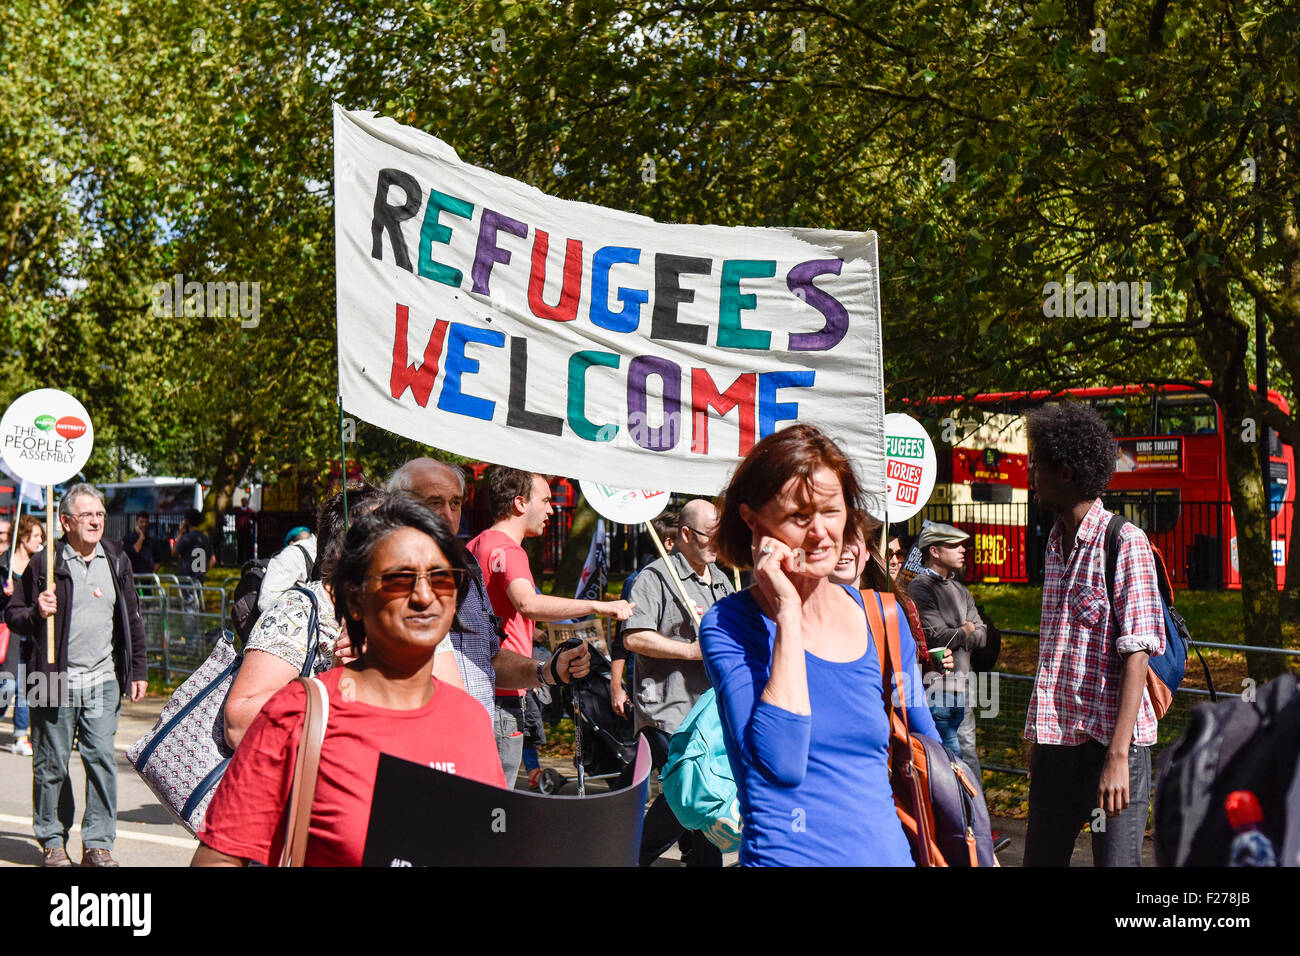 A demonstration in support of refugees and migrants in London. Stock Photo